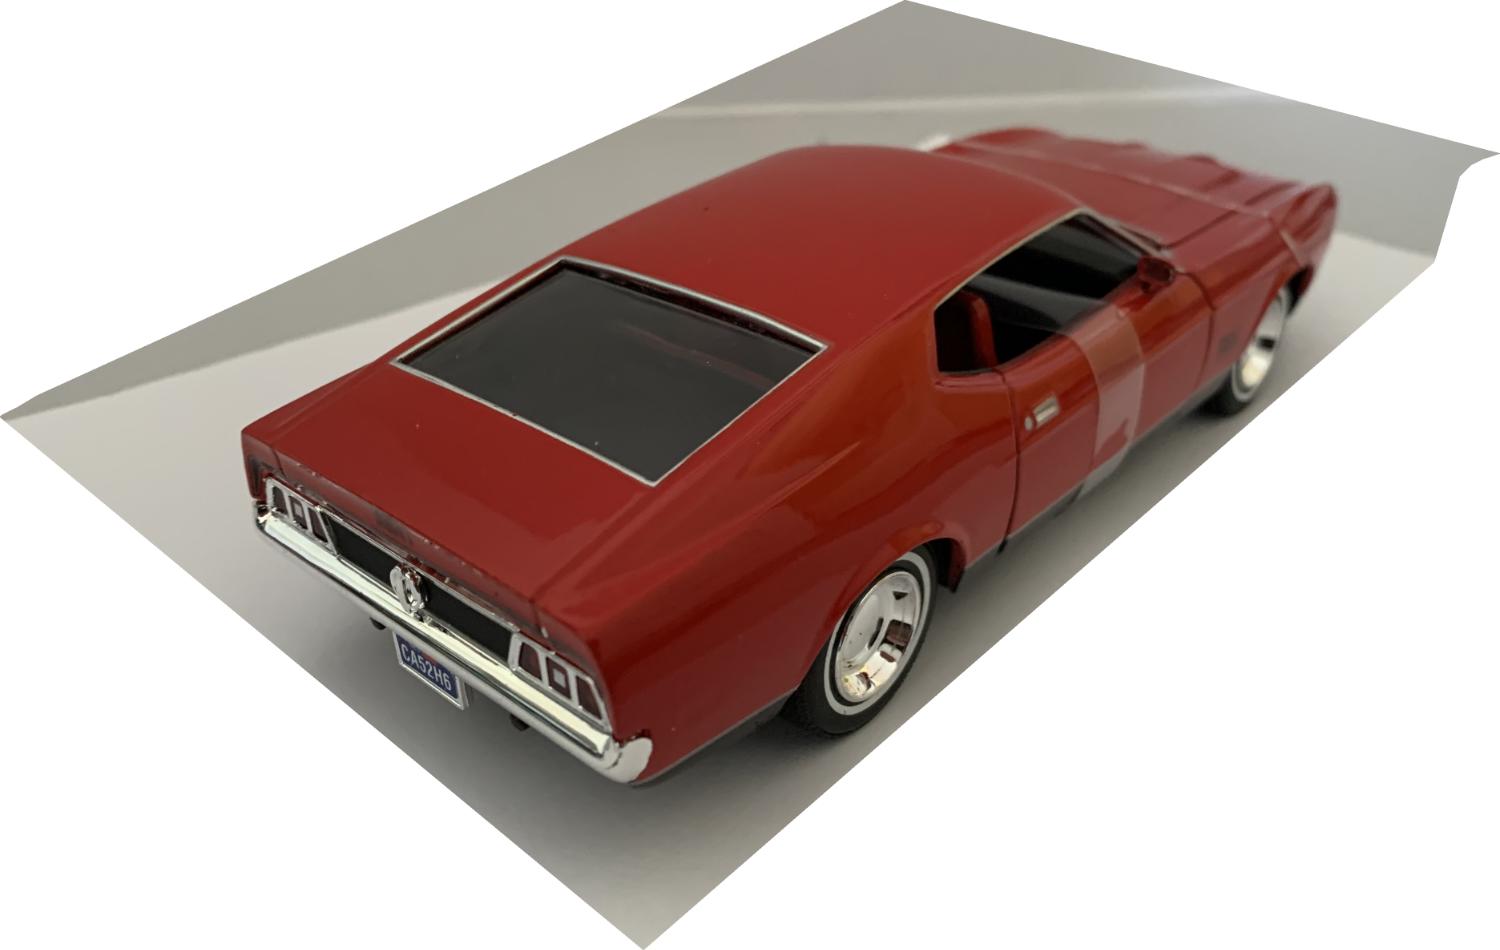 A good reproduction of the Ford Mustang Mach 1 with detail throughout, all authentically recreated.      The model is presented James Bond 007 60 Years of Bond window display box, the car is approx. 20 cm long and the presentation box is 24.5 cm